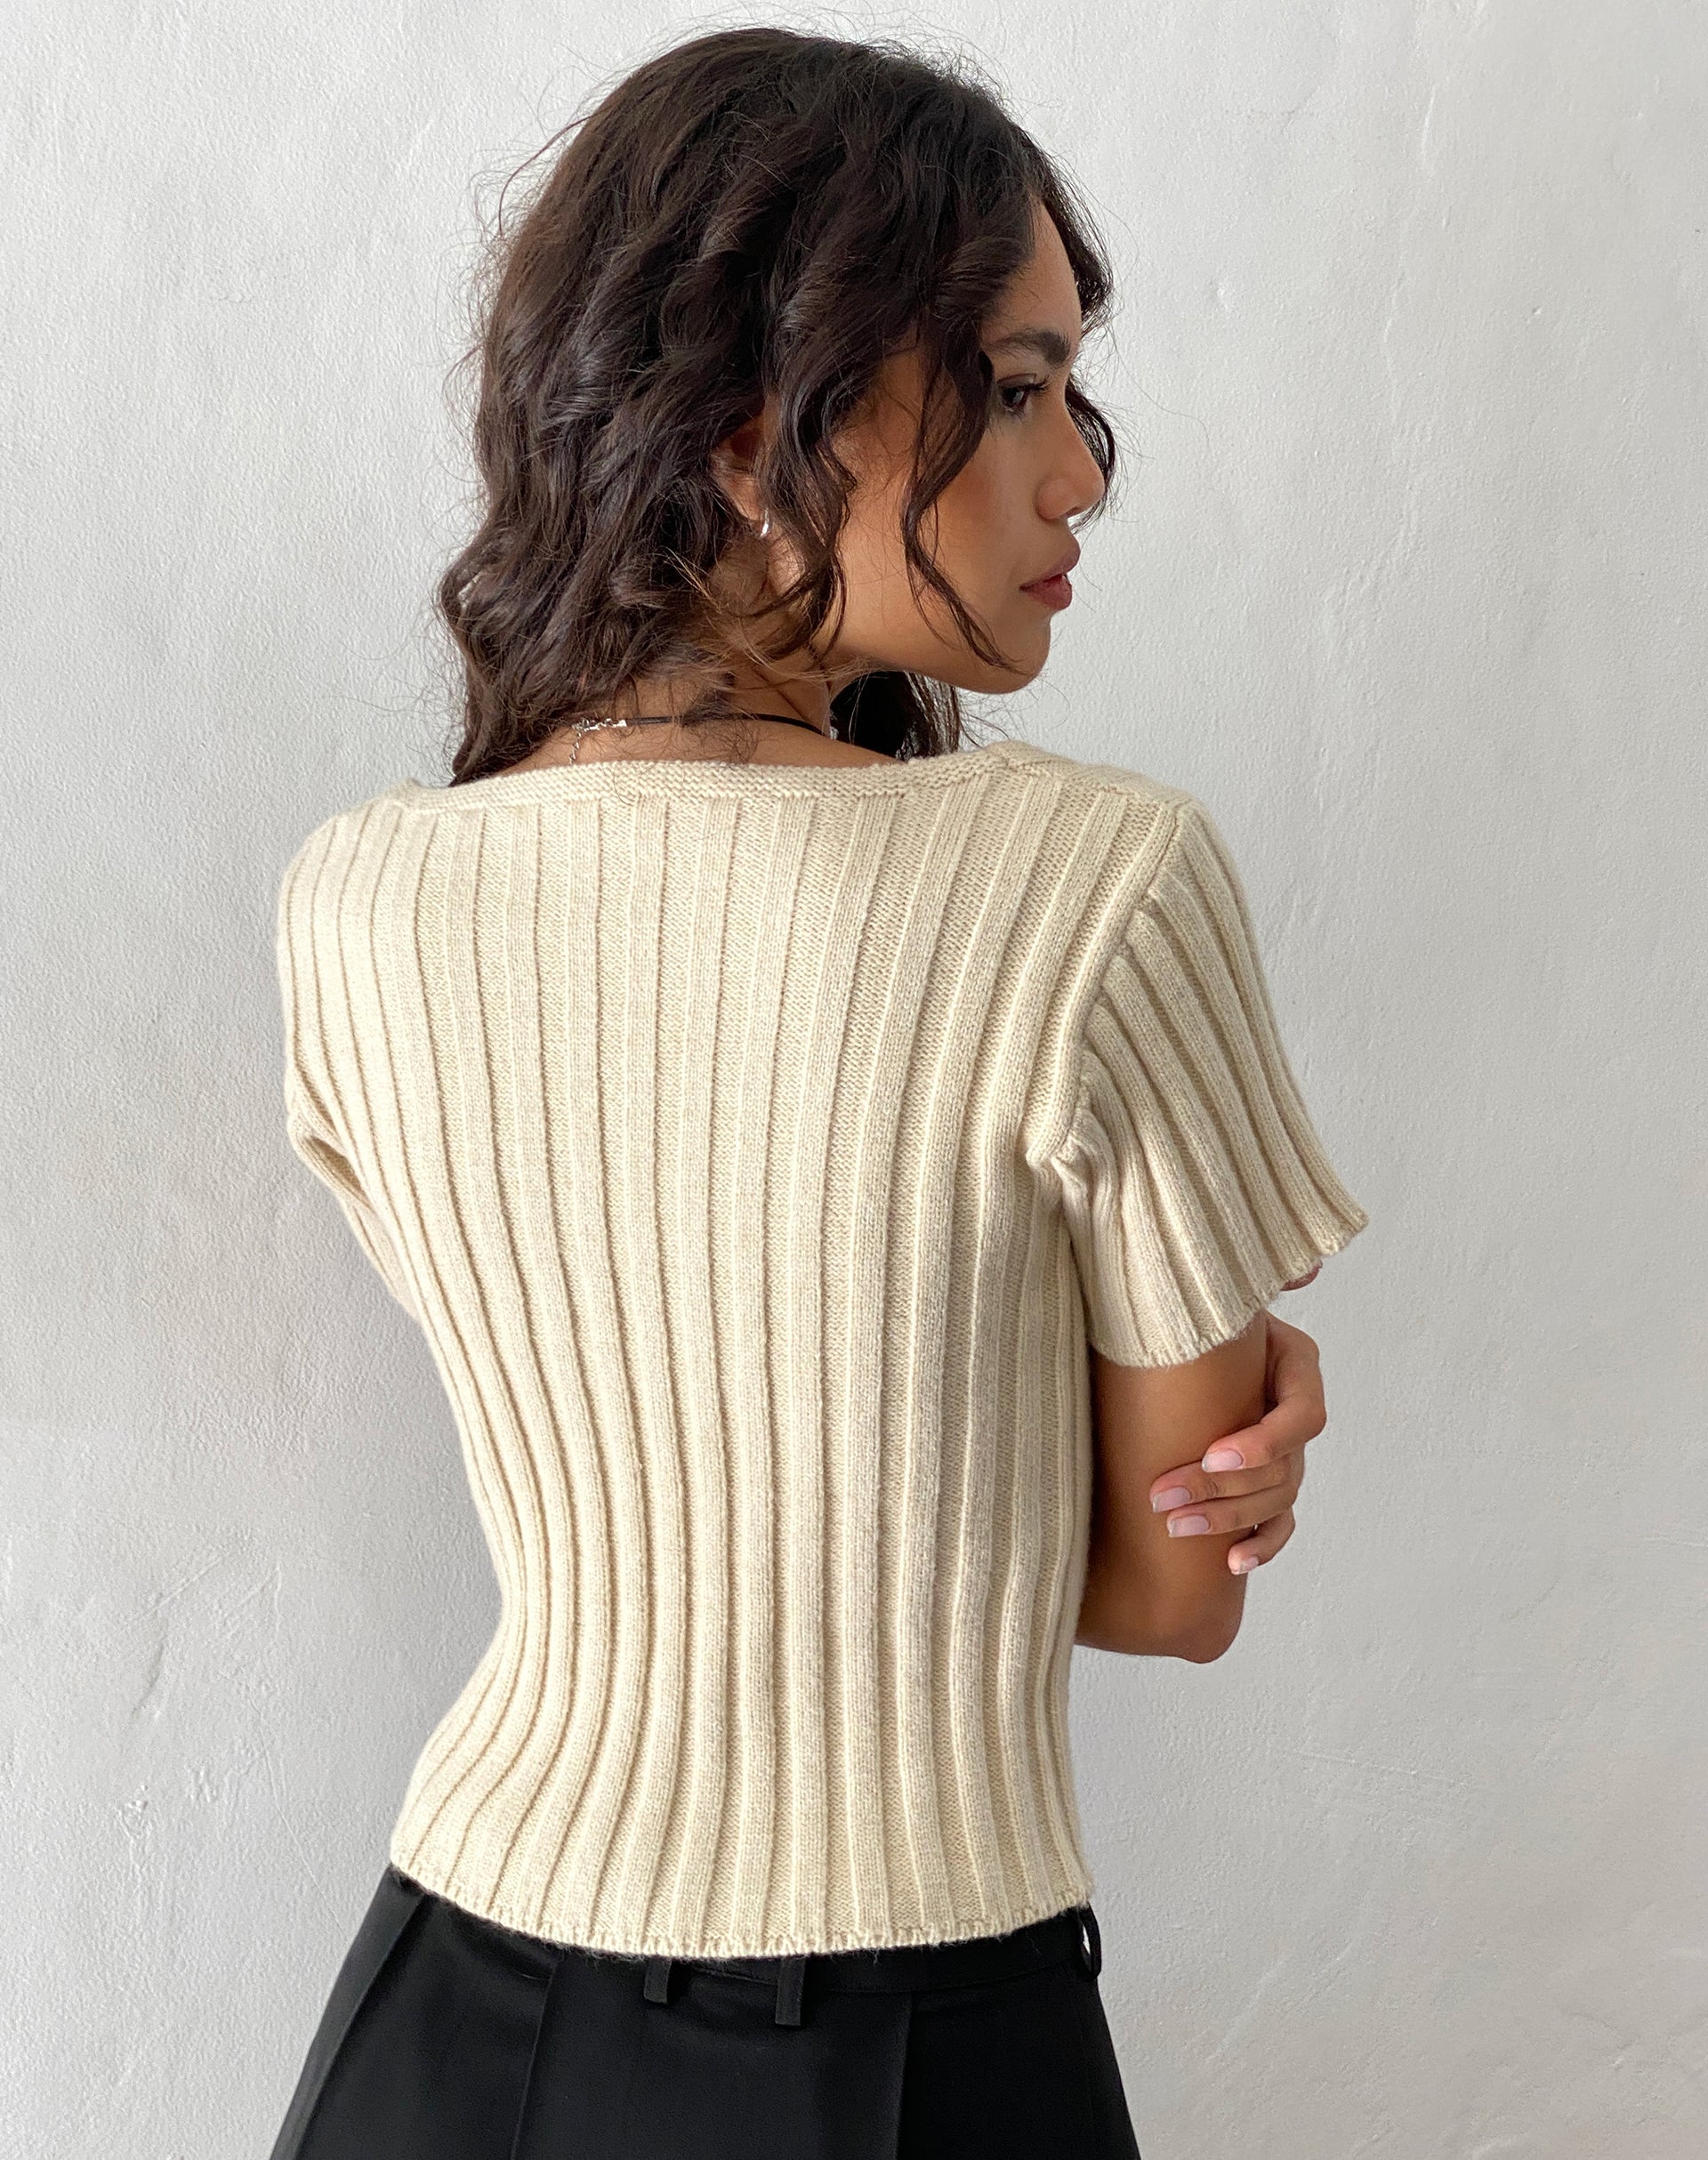 Image of Estella Short Sleeve Knitted Top in Natural Oat